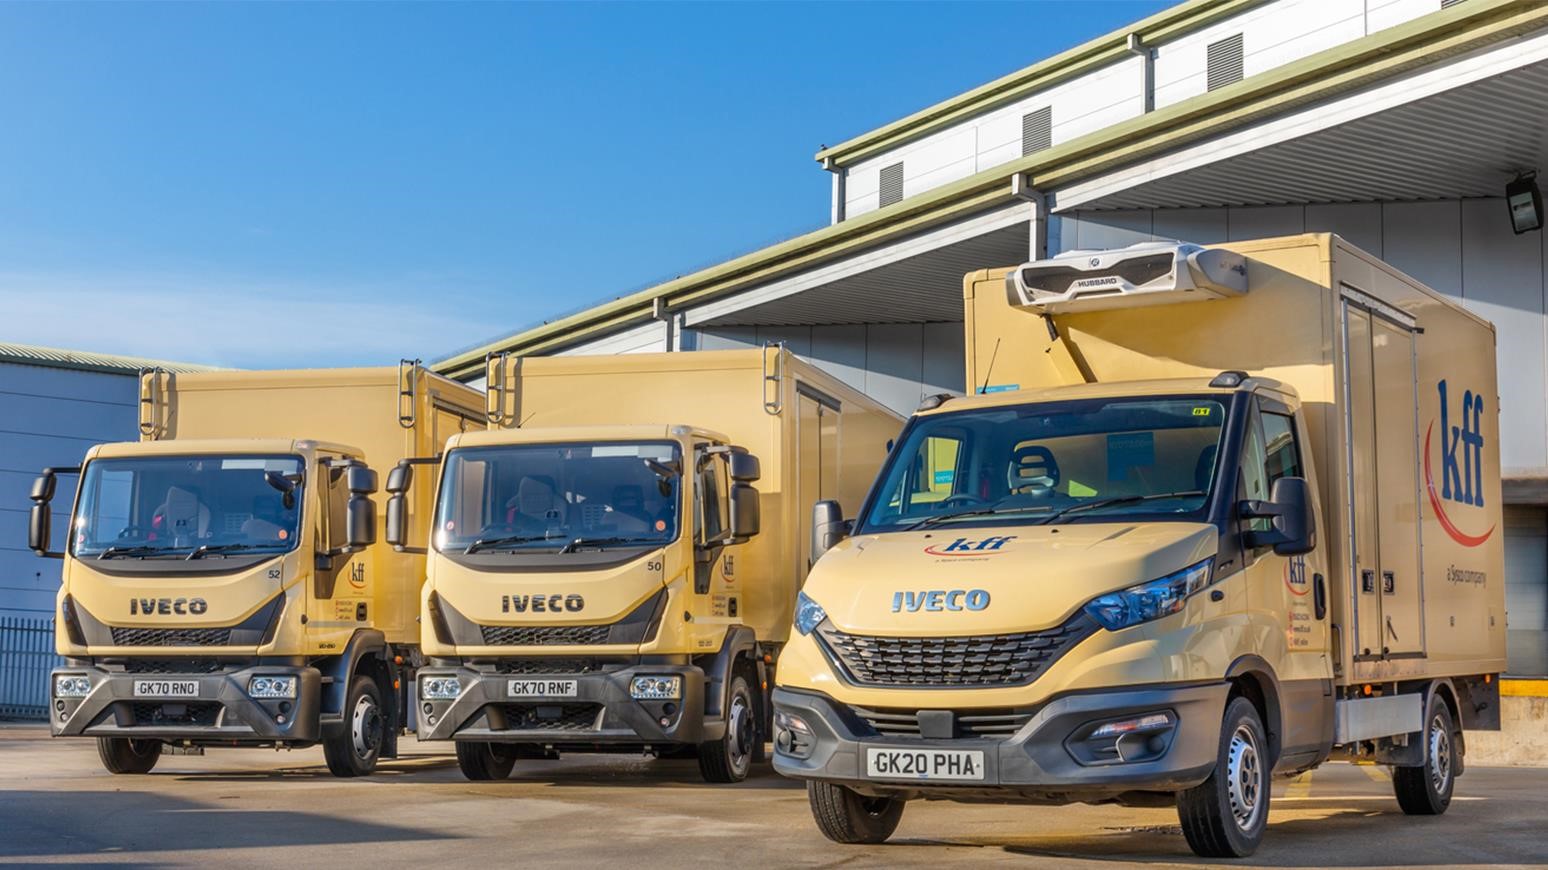 Kent-Based Food Distributor Adds 31 New IVECO Vehicles, Including 13 Eurocargo Trucks & 18 Daily Vans